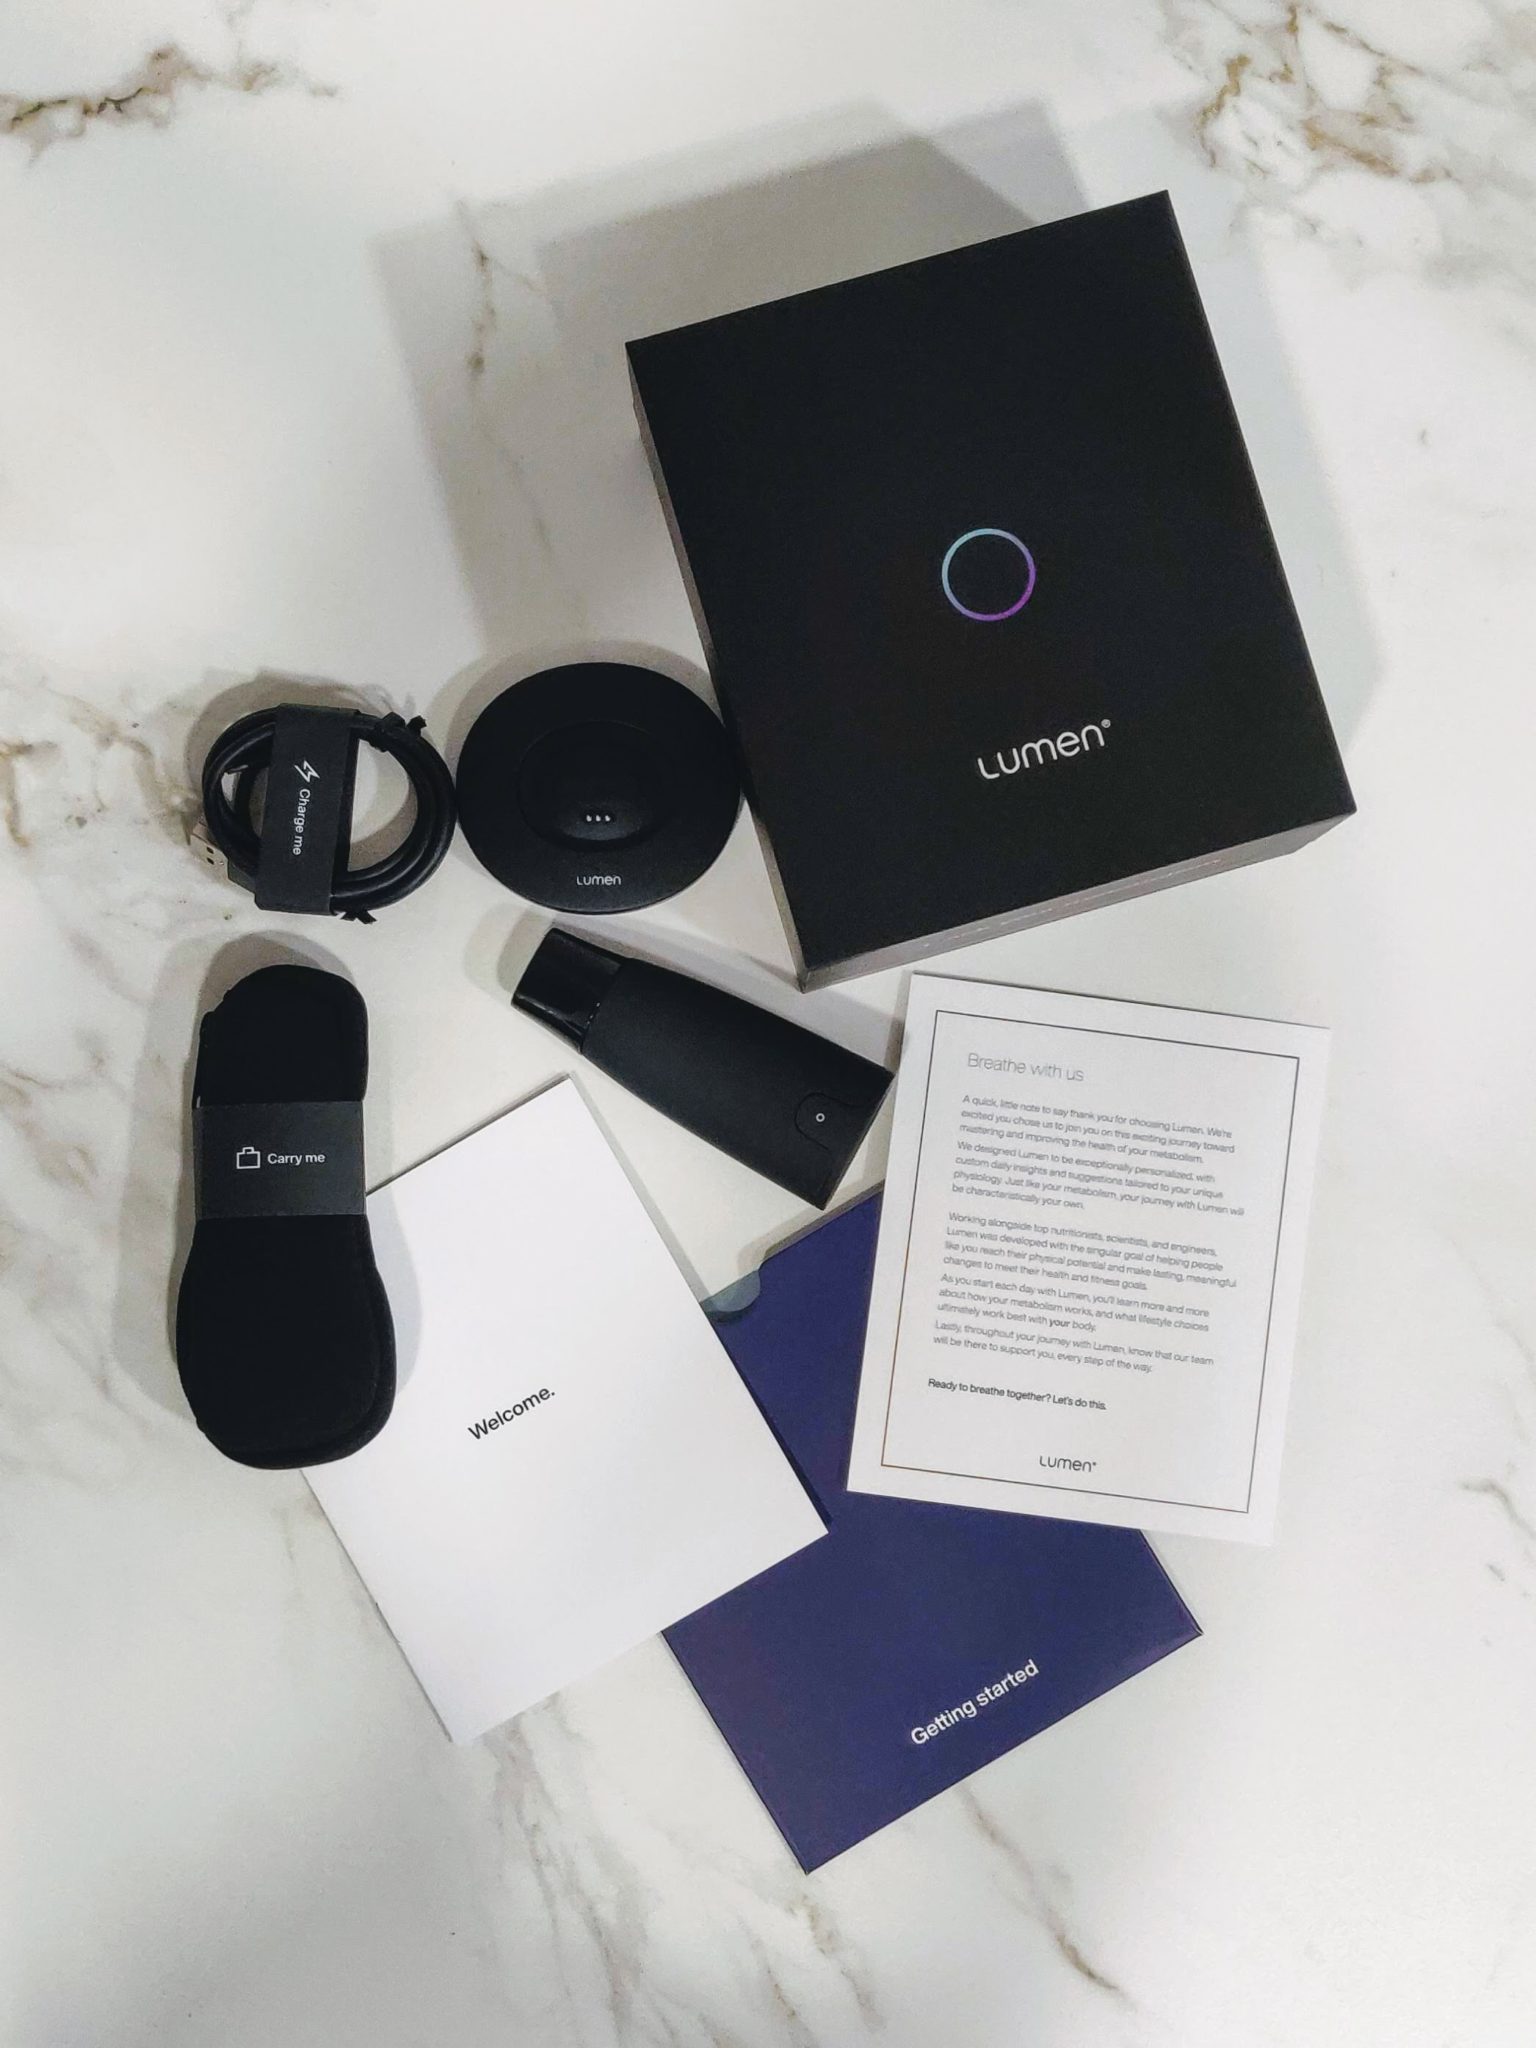 Lumen Review Why I Am So Impressed after 4 Weeks of Testing